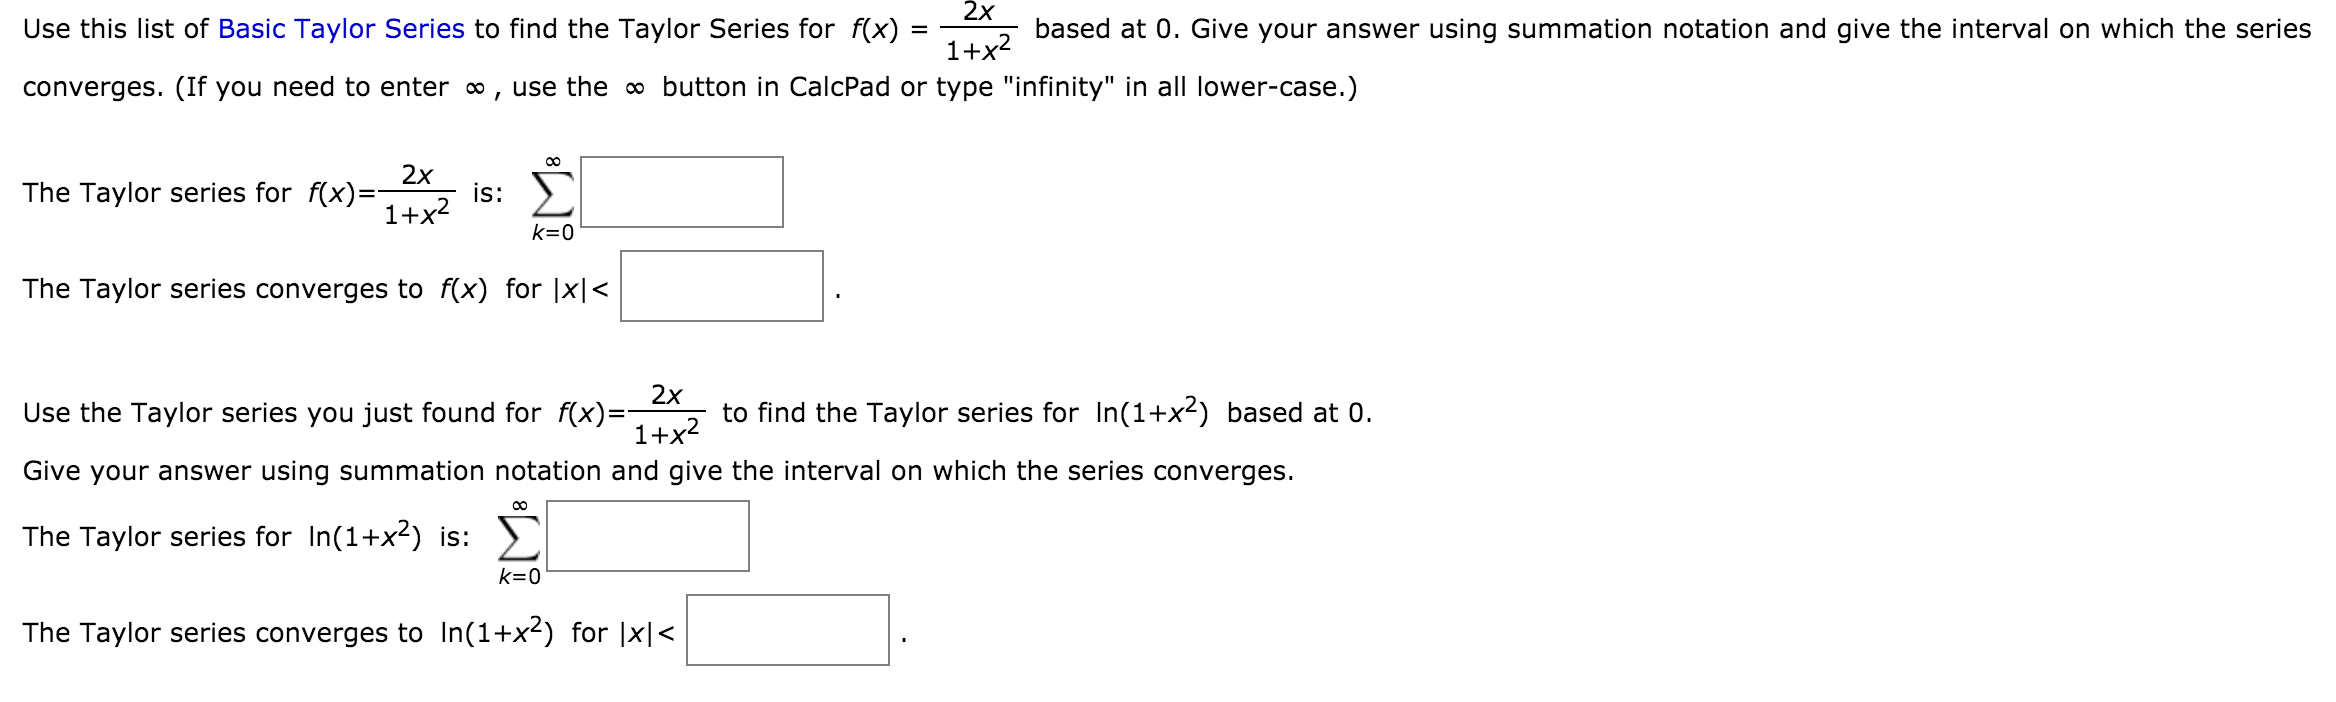 calcpad answer key notation